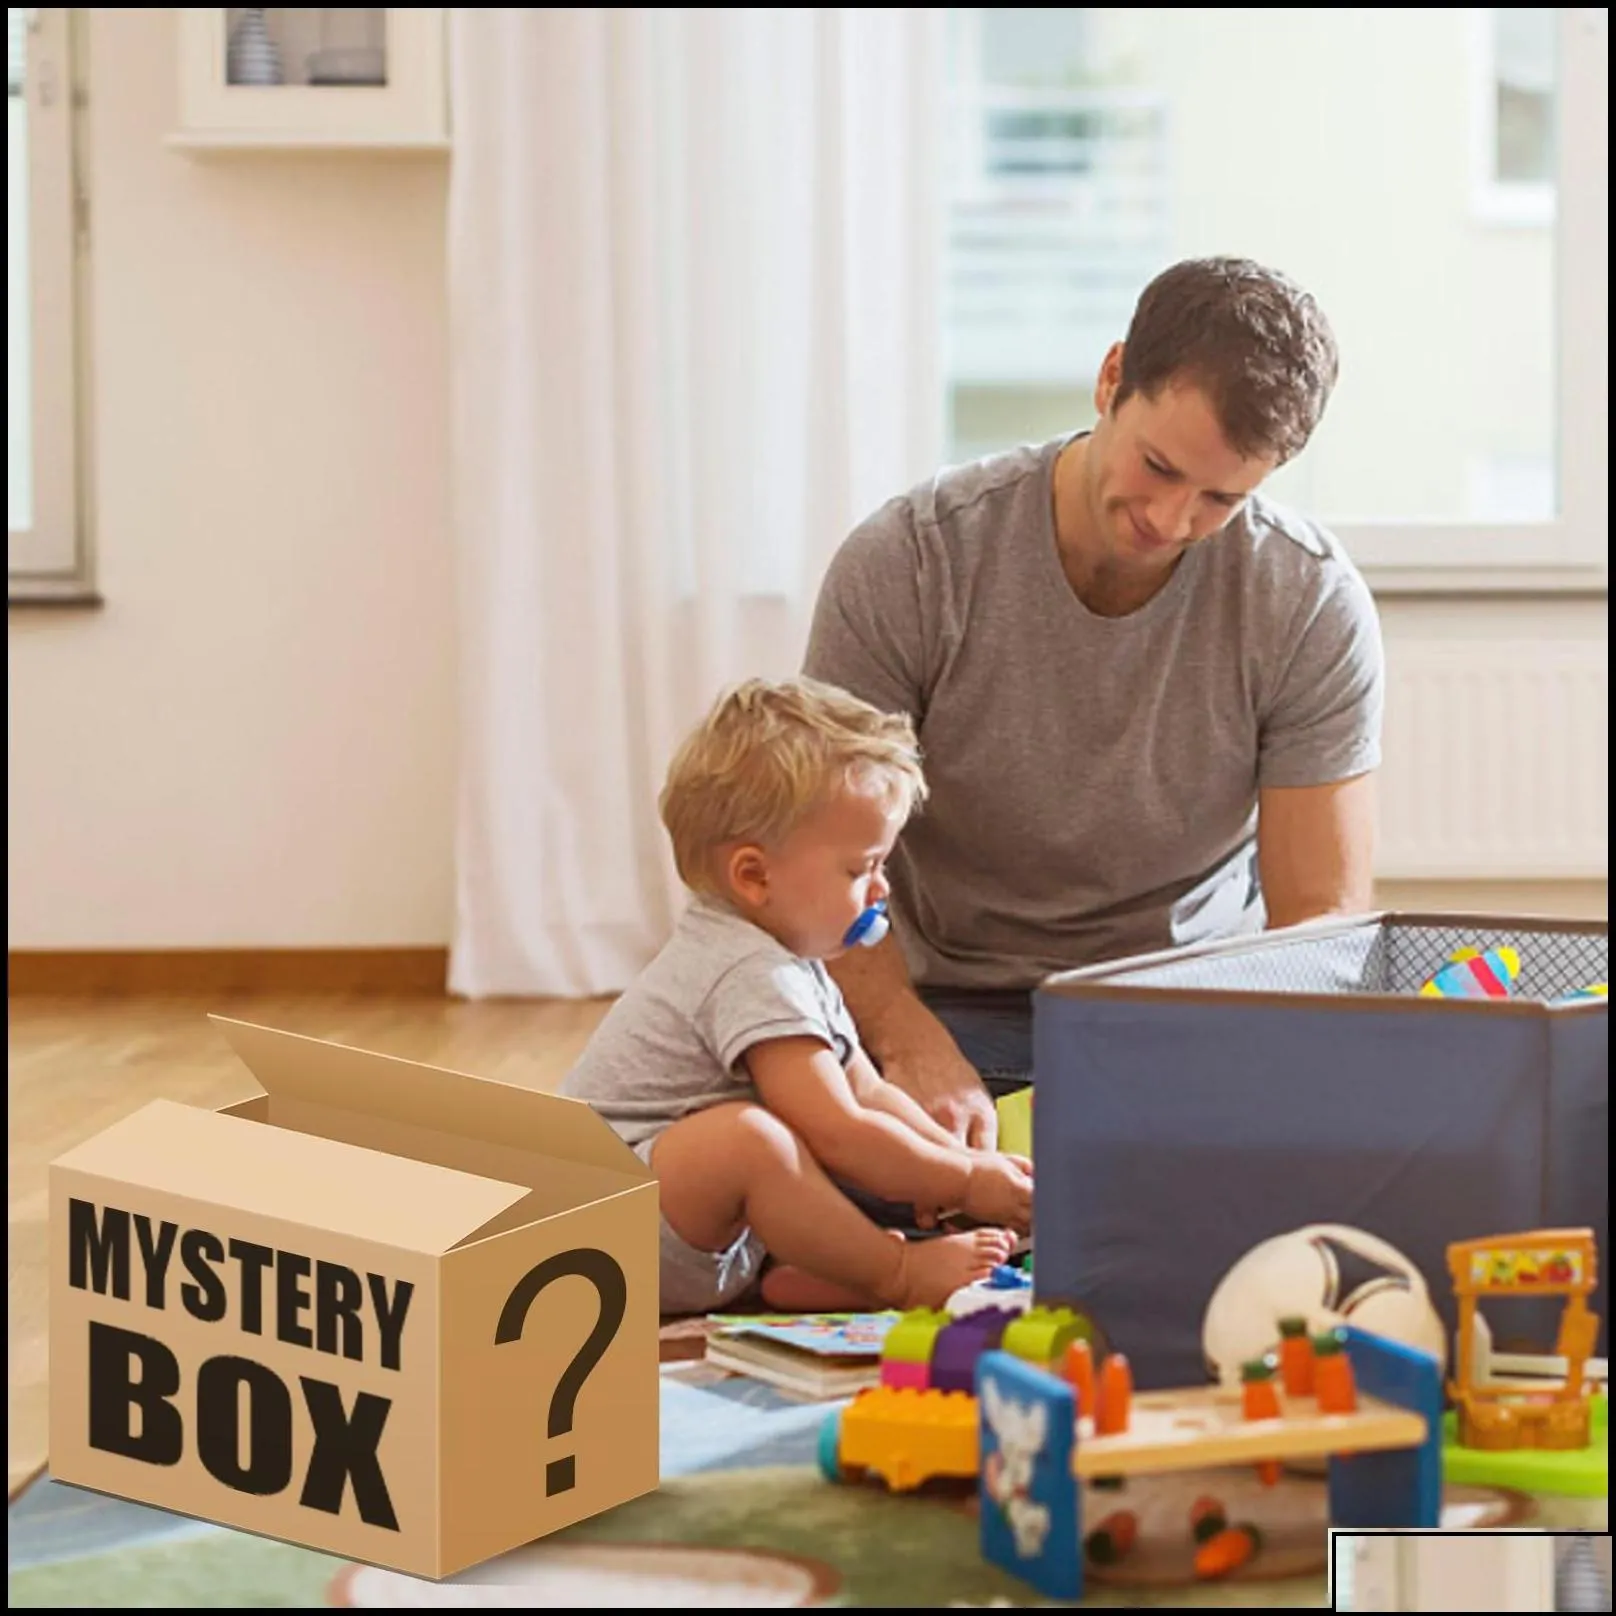 party favor mystery box electronics boxes random birthday surprise favors lucky for adts gift such as drones smart watches-c dr dhhwn